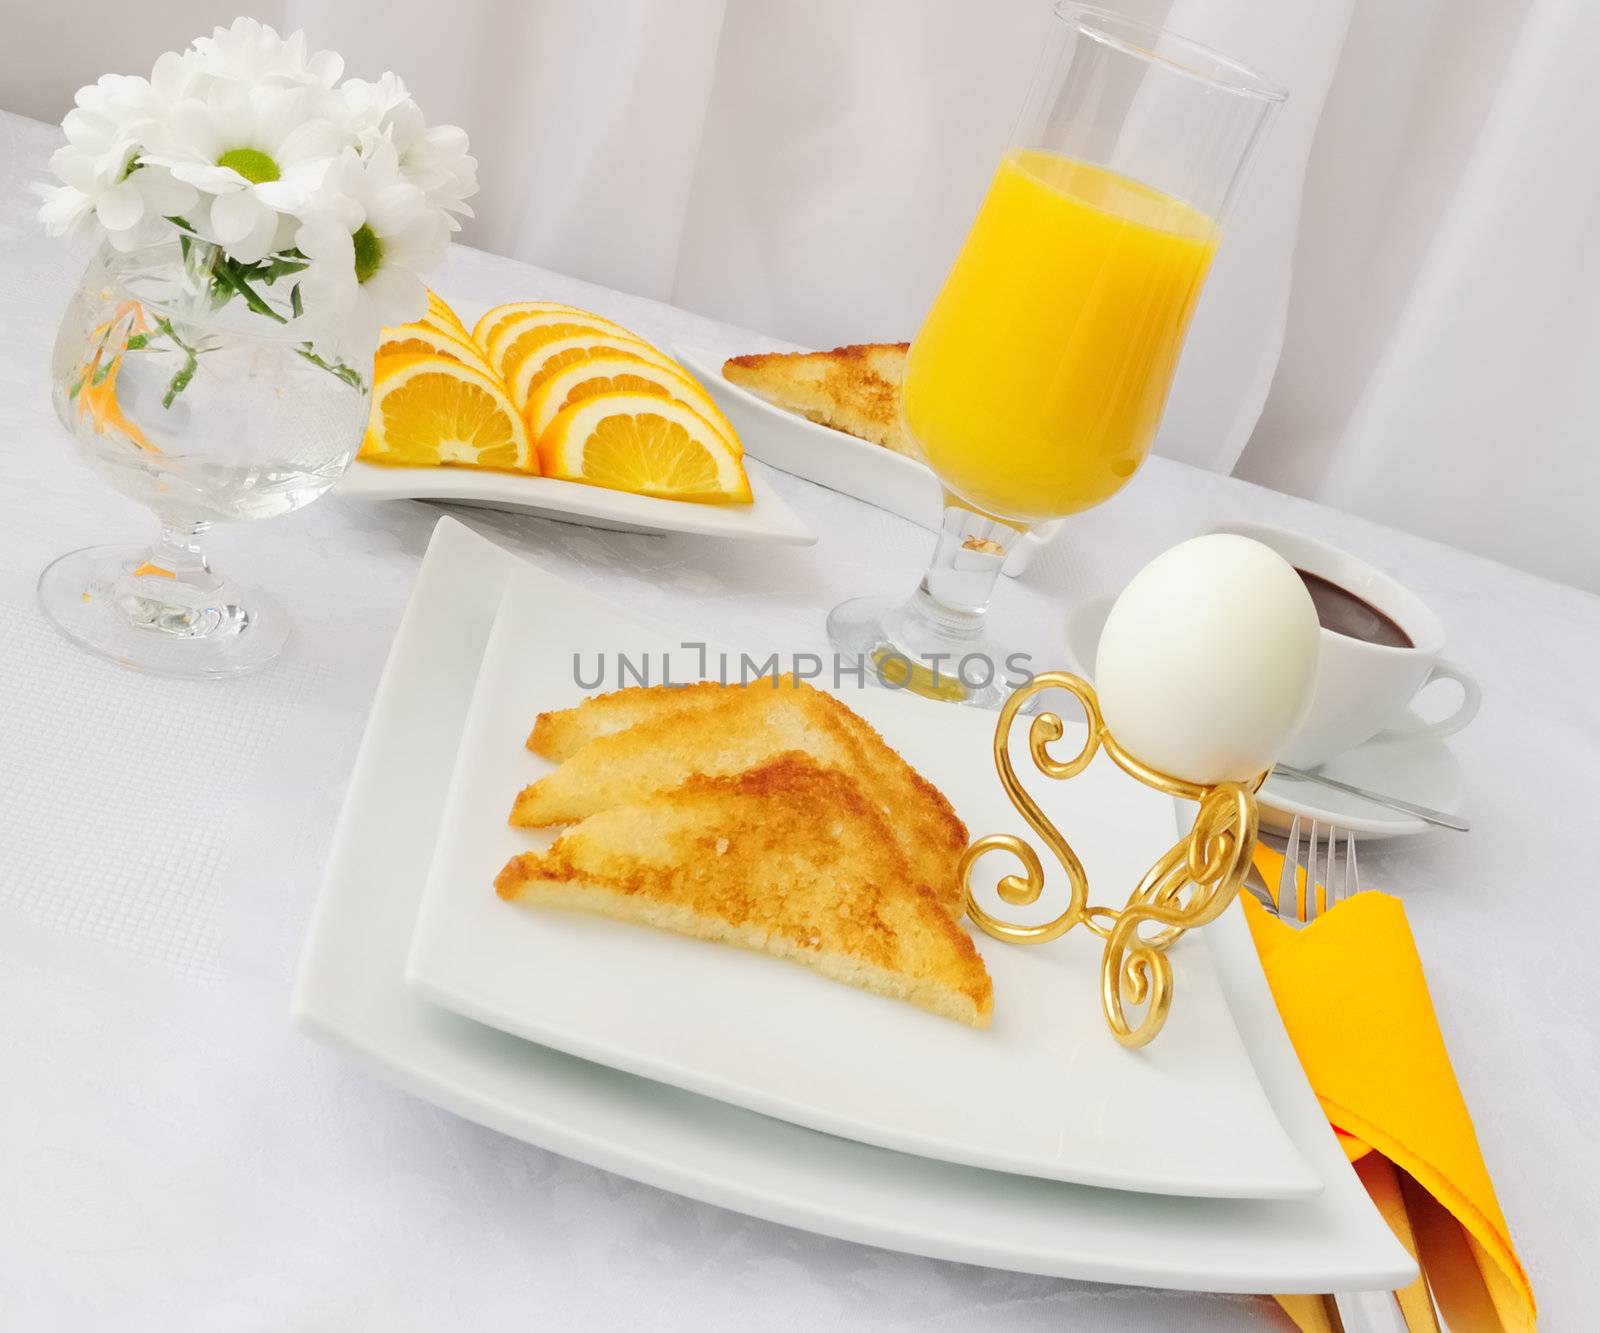  Breakfast with an egg on a stand with hot chocolate and orange juice